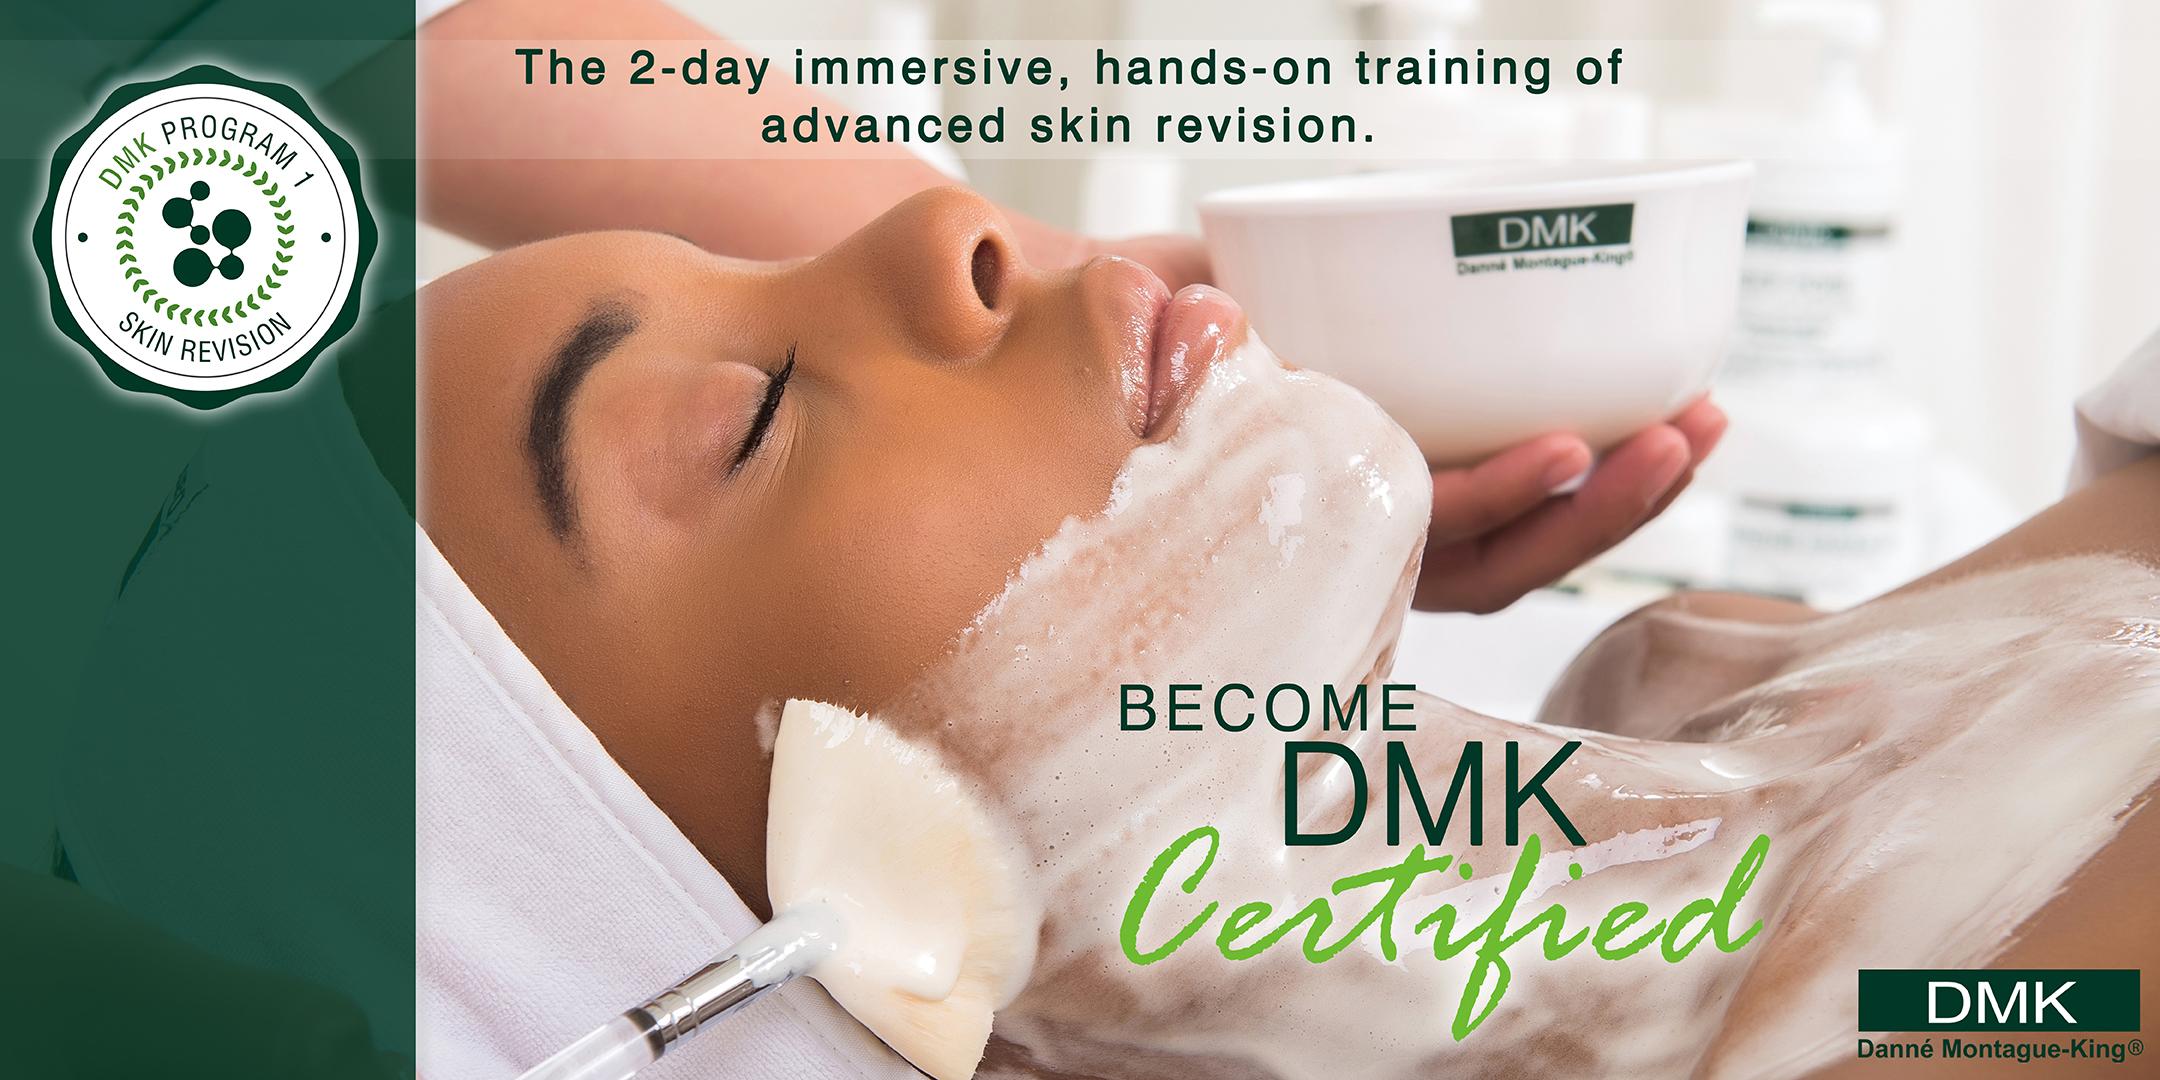 Plano, TX DMK Skin Revision Training- 2 Day Boot Camp, Program One